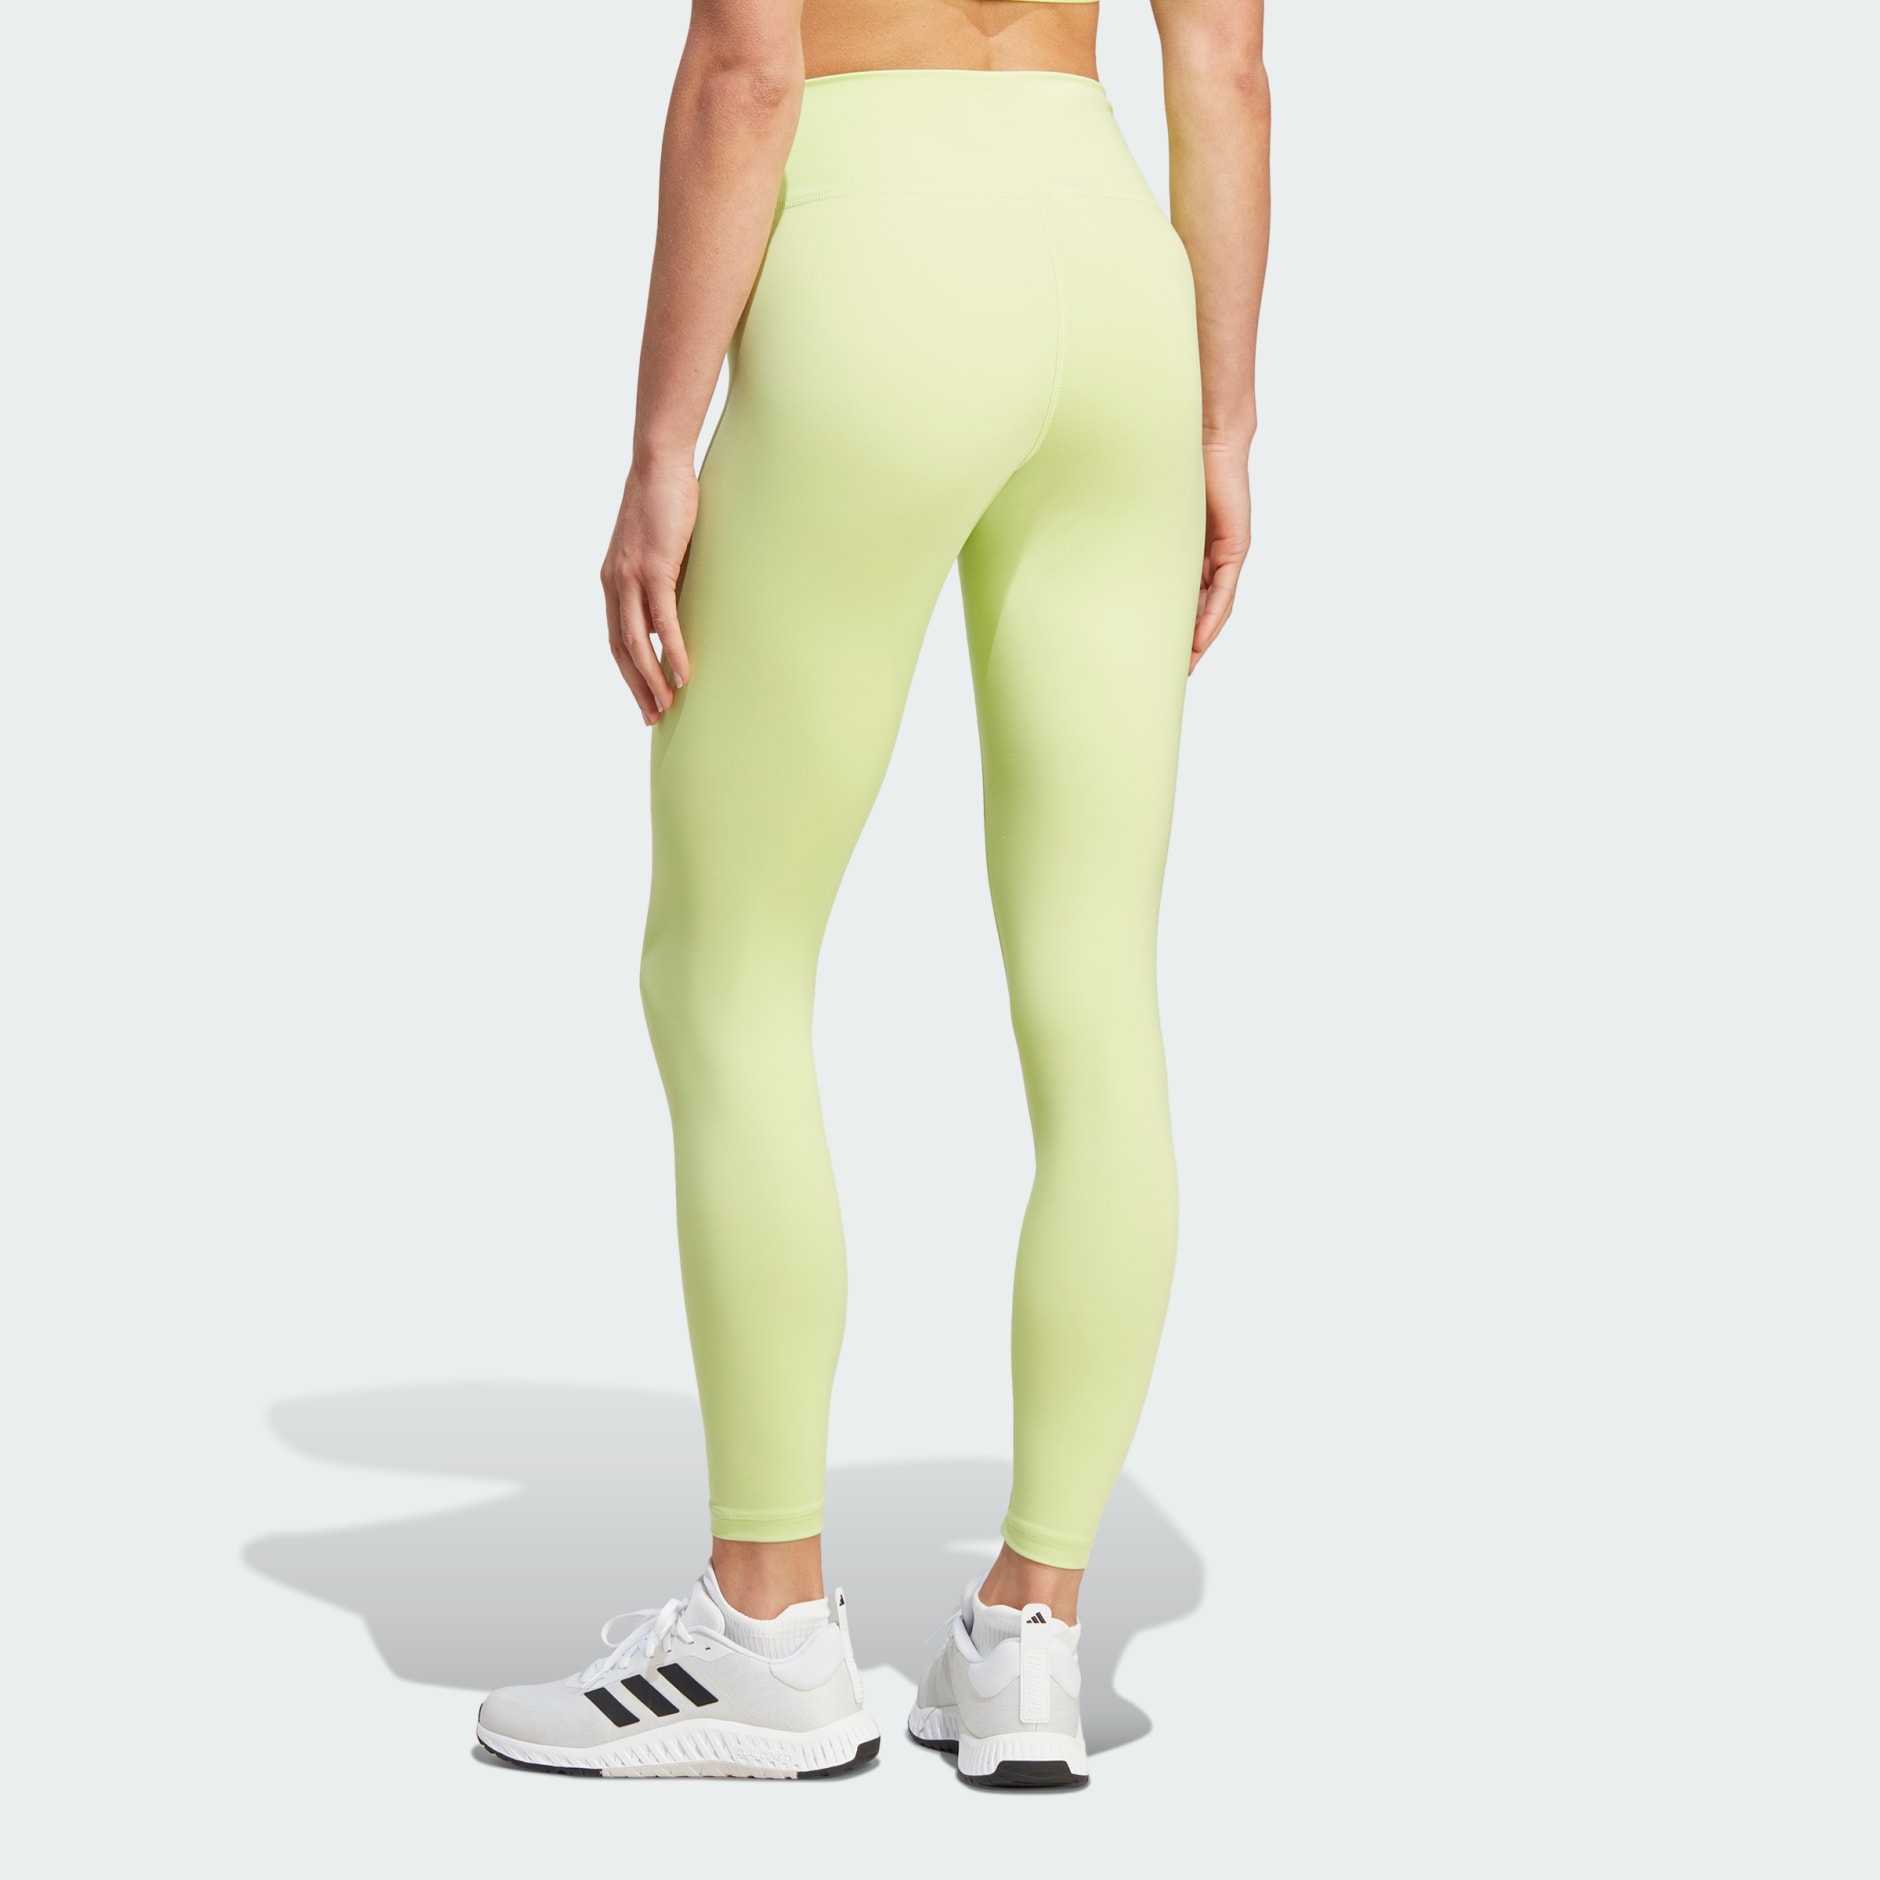 Buy Neon Green Leggings, Solid Bright Lime Green Plus Size High Waist  Crossover Leggings With Pocket, Soft Stretch Hot Green Yoga Workout Pants  Online in India - Etsy